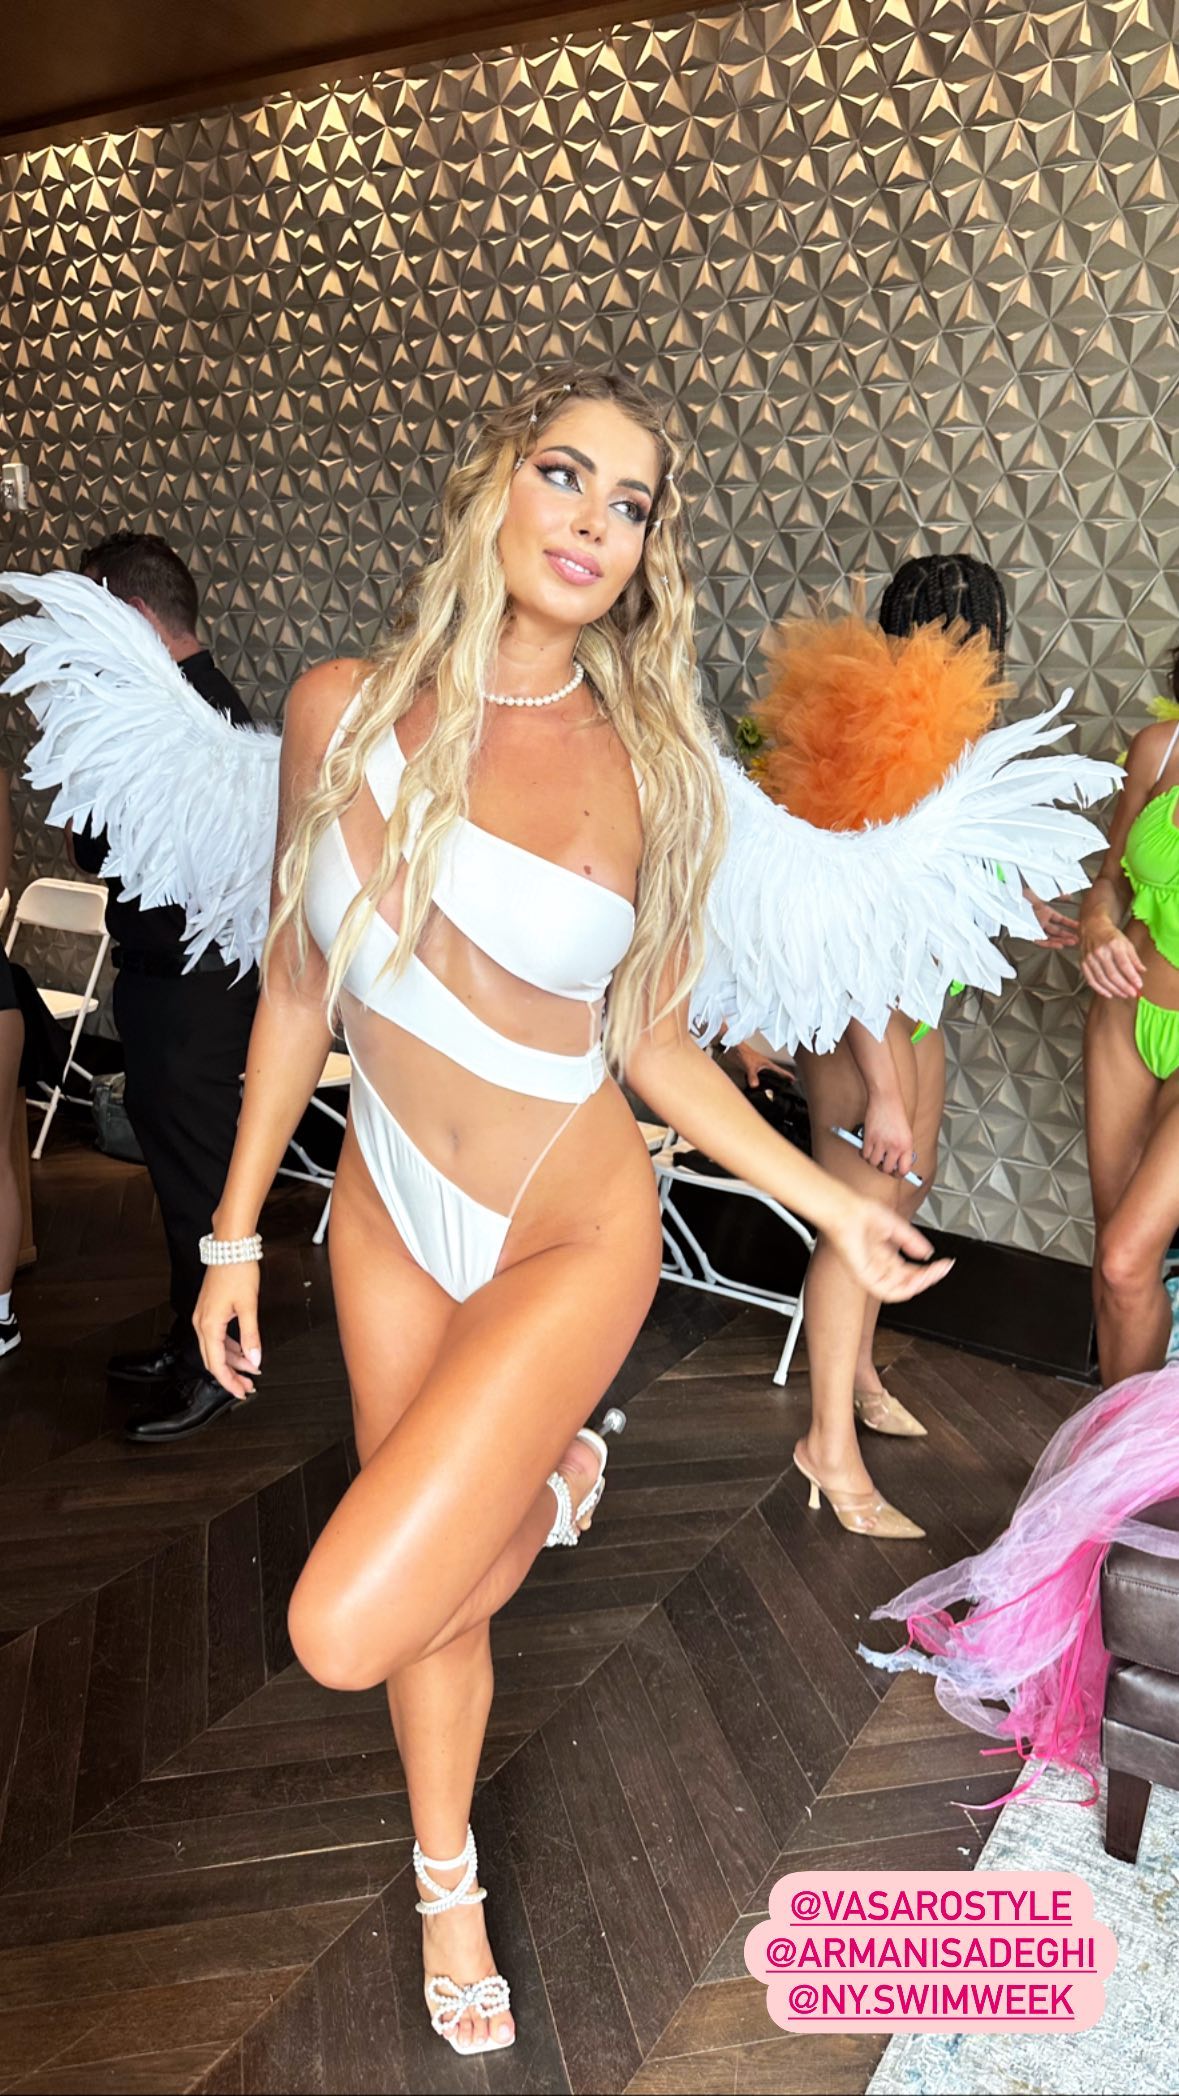 She wowed in a white one-piece complete with eye-catching white feathered wings